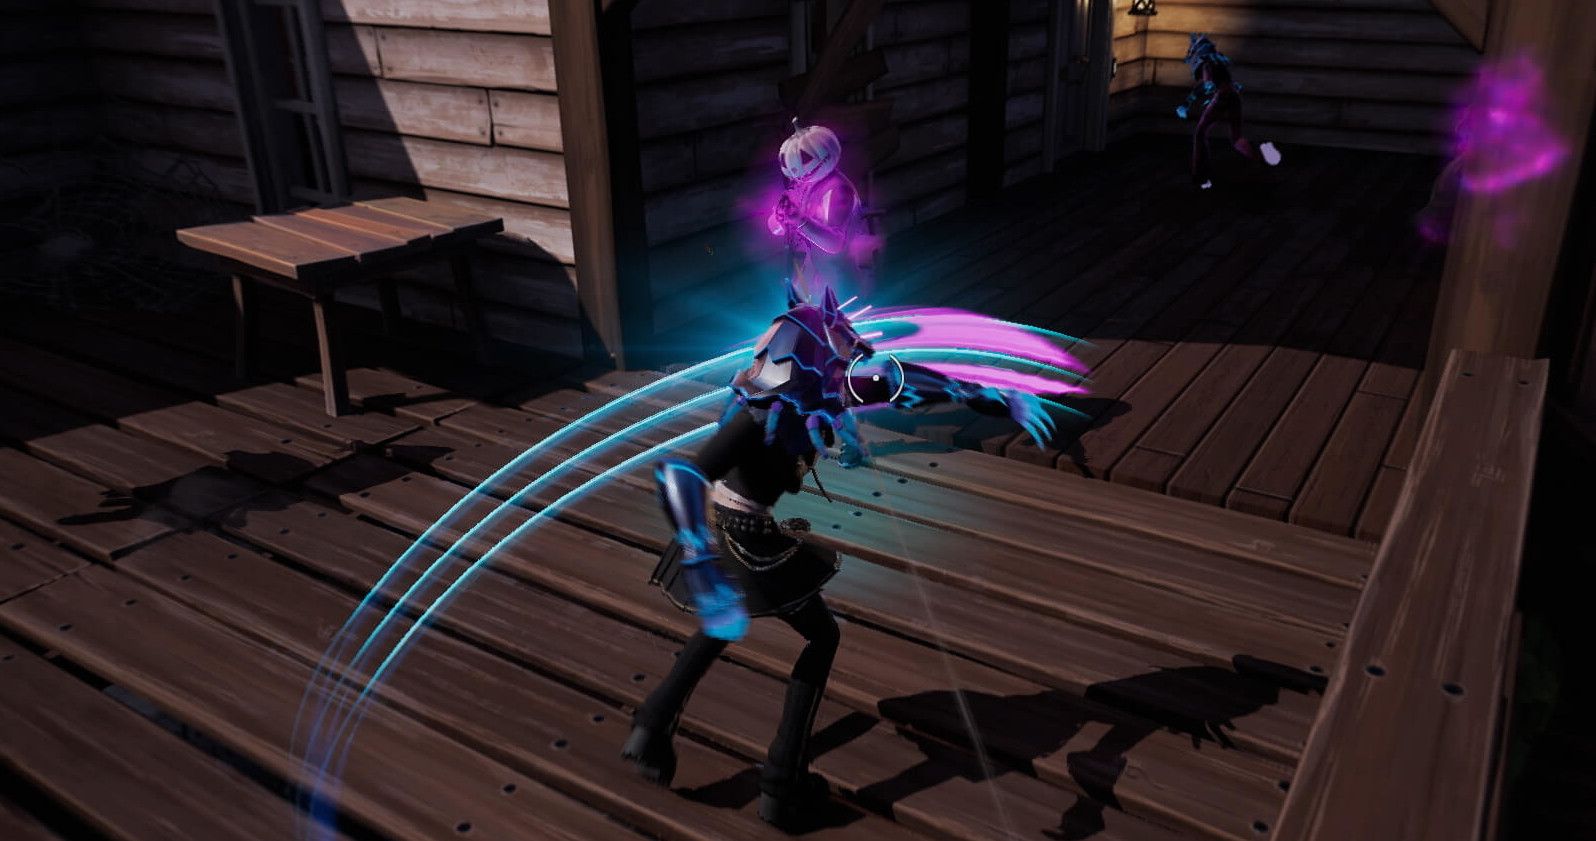 Image of a Fortnite character slashing with the Howler Claws.